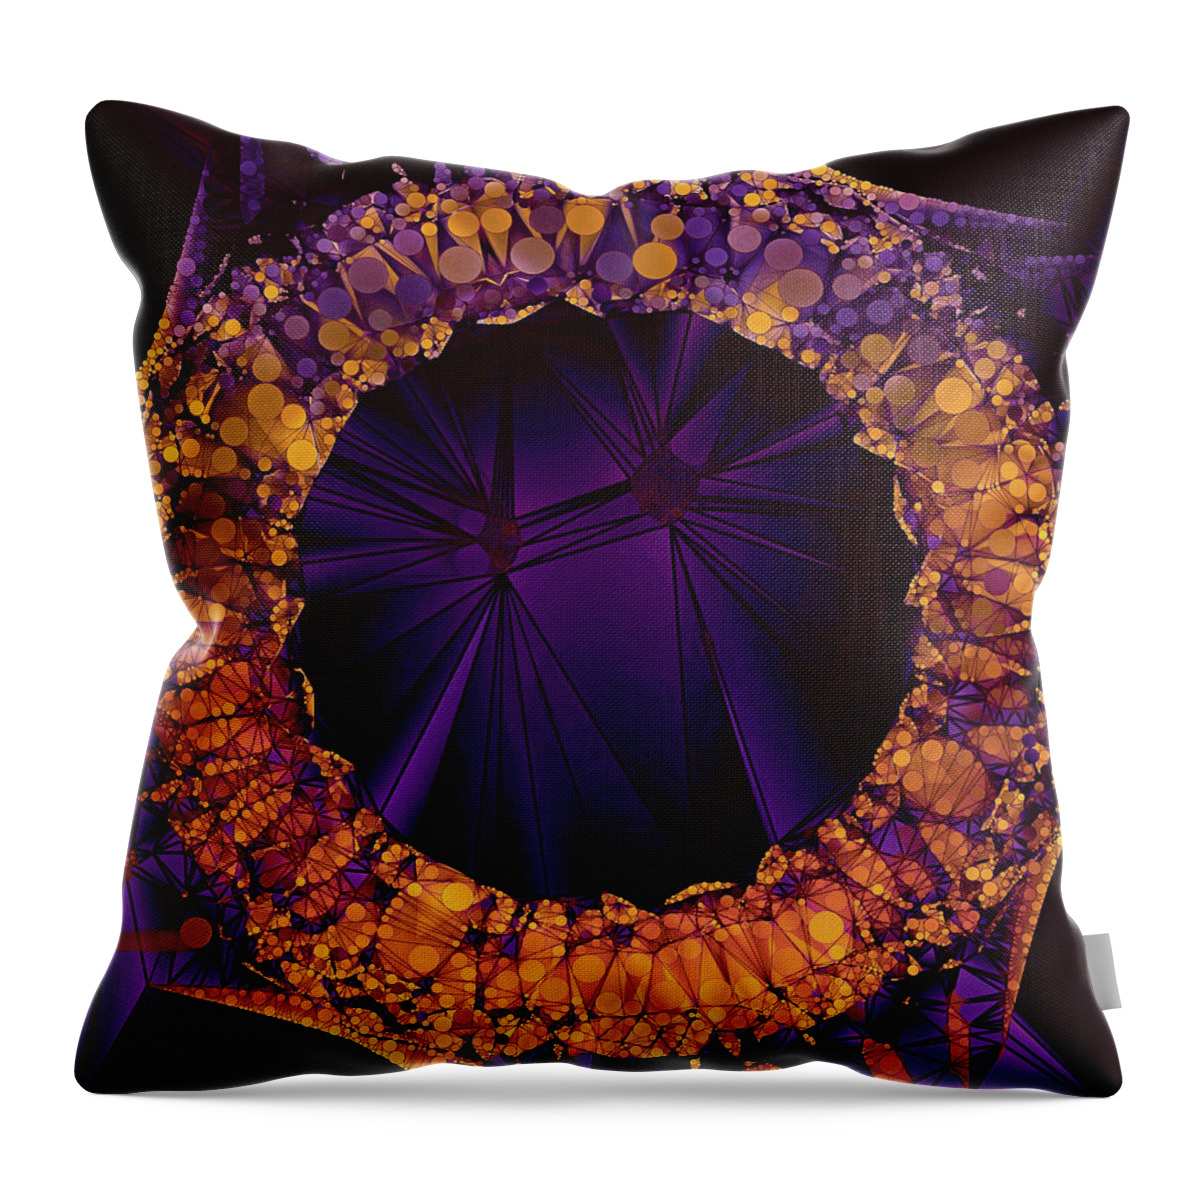 Violet Geometrical Throw Pillow featuring the digital art Eviternity by Susan Maxwell Schmidt